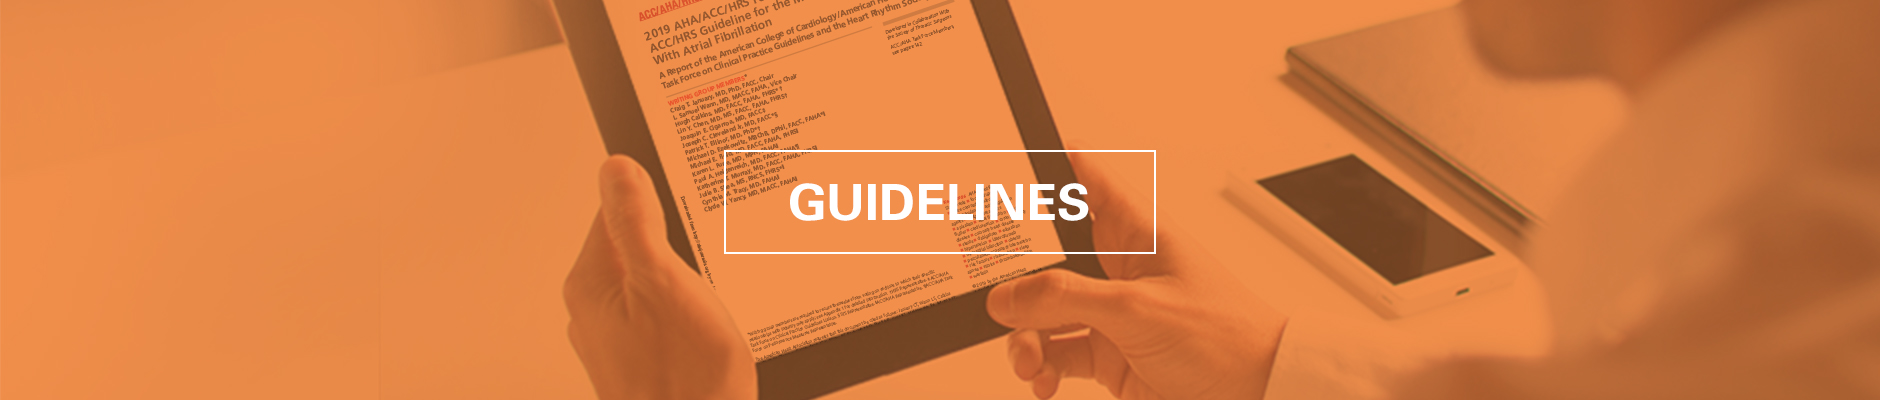 OPTION Clinical Trial Guidelines